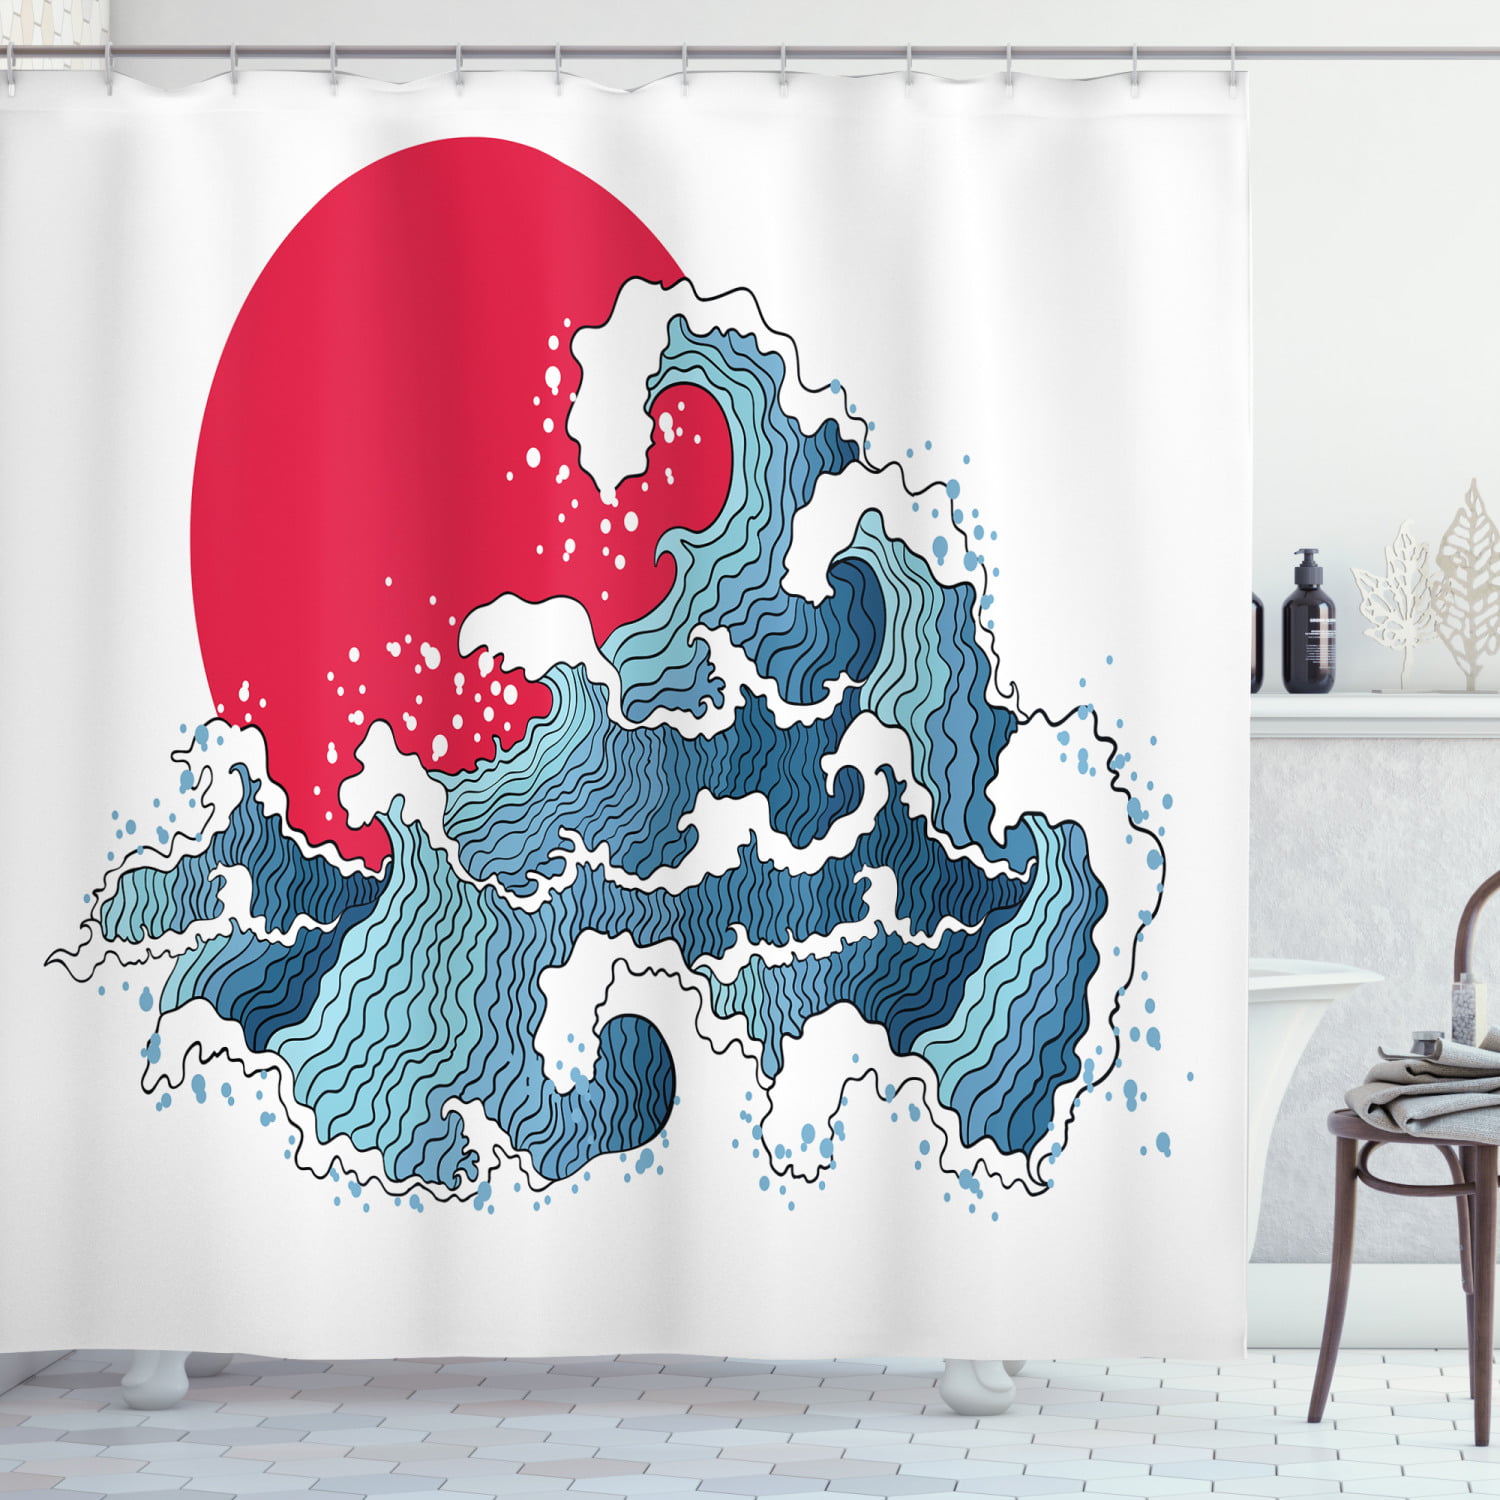 Japanese Shower Curtain The Great Wave, The Great Red Wave Shower Curtain